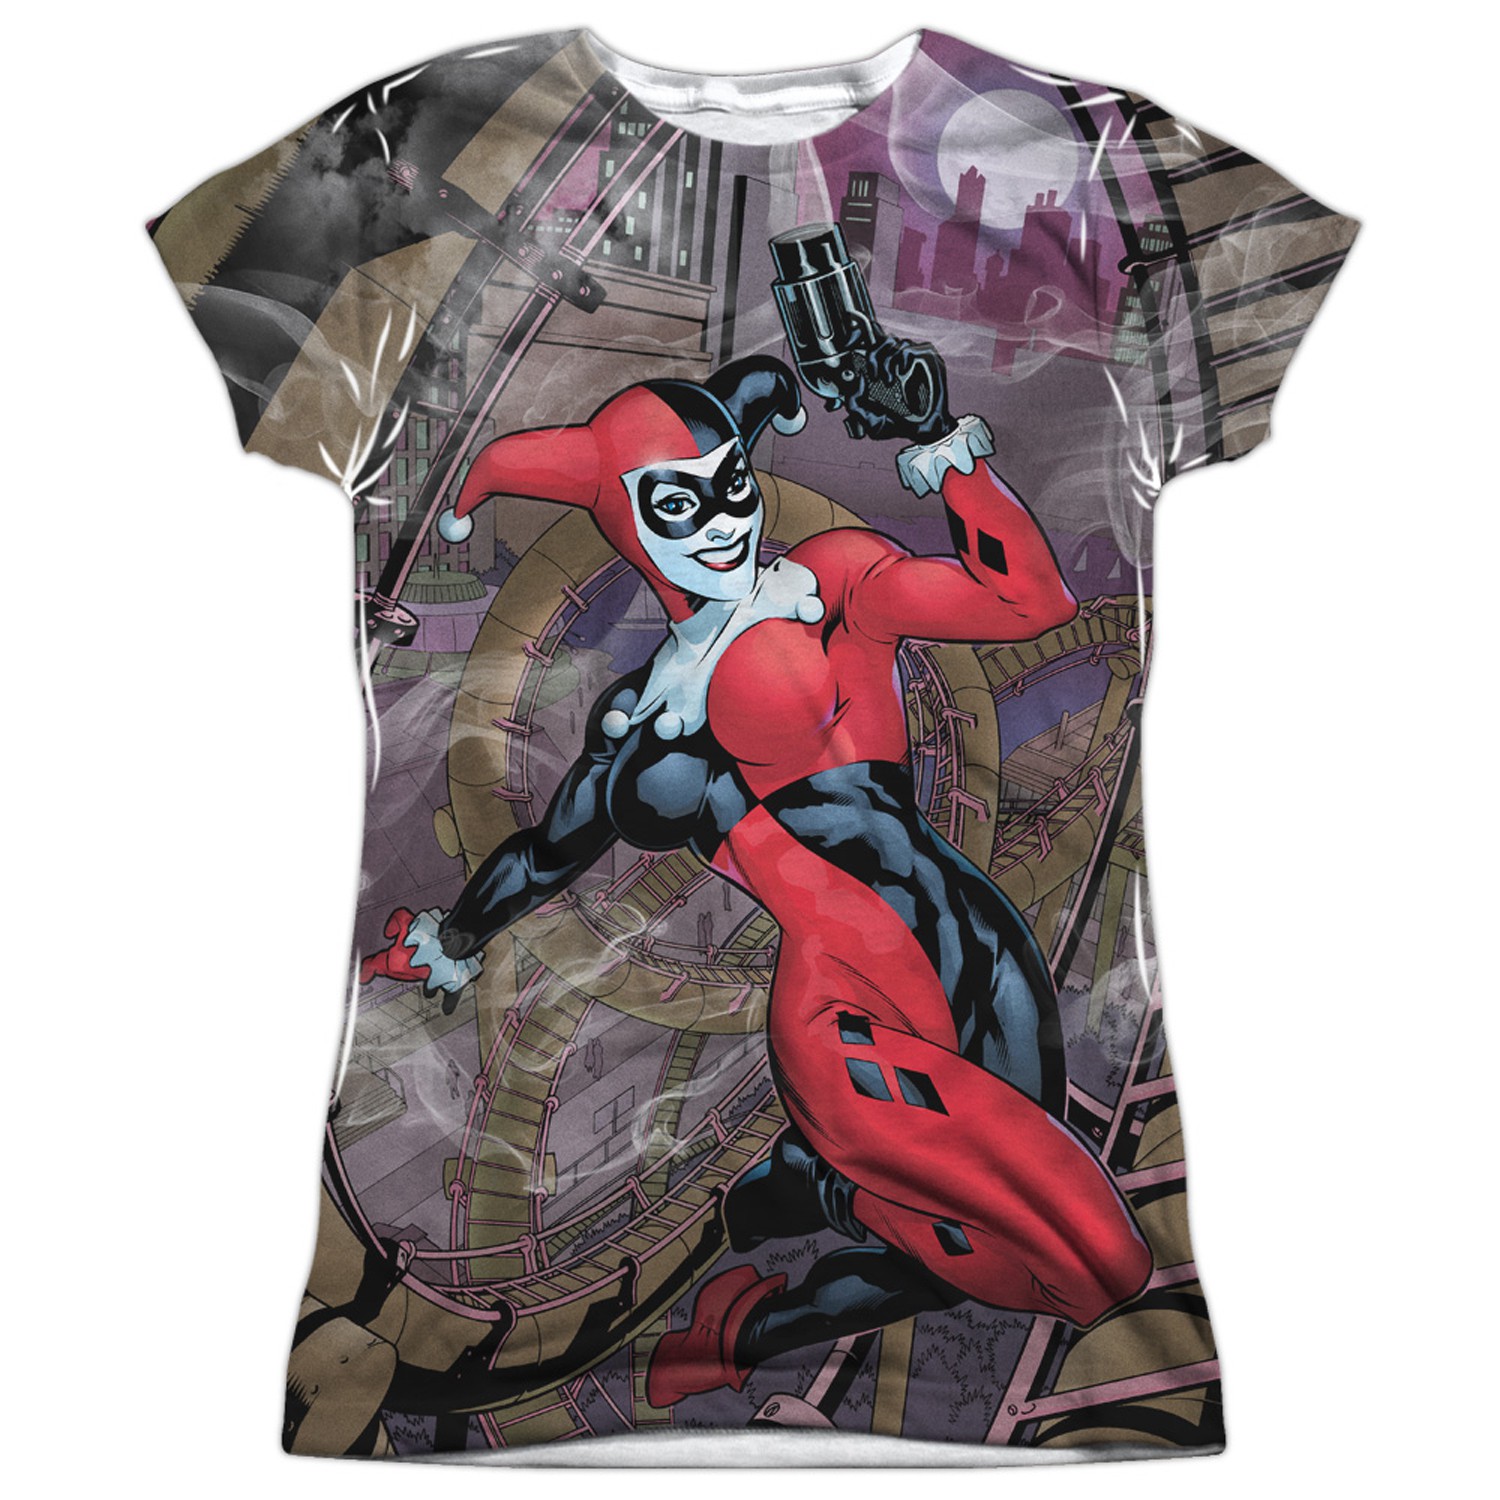 Harley Quinn Roller Coaster of Love Women's Sublimated Tshirt